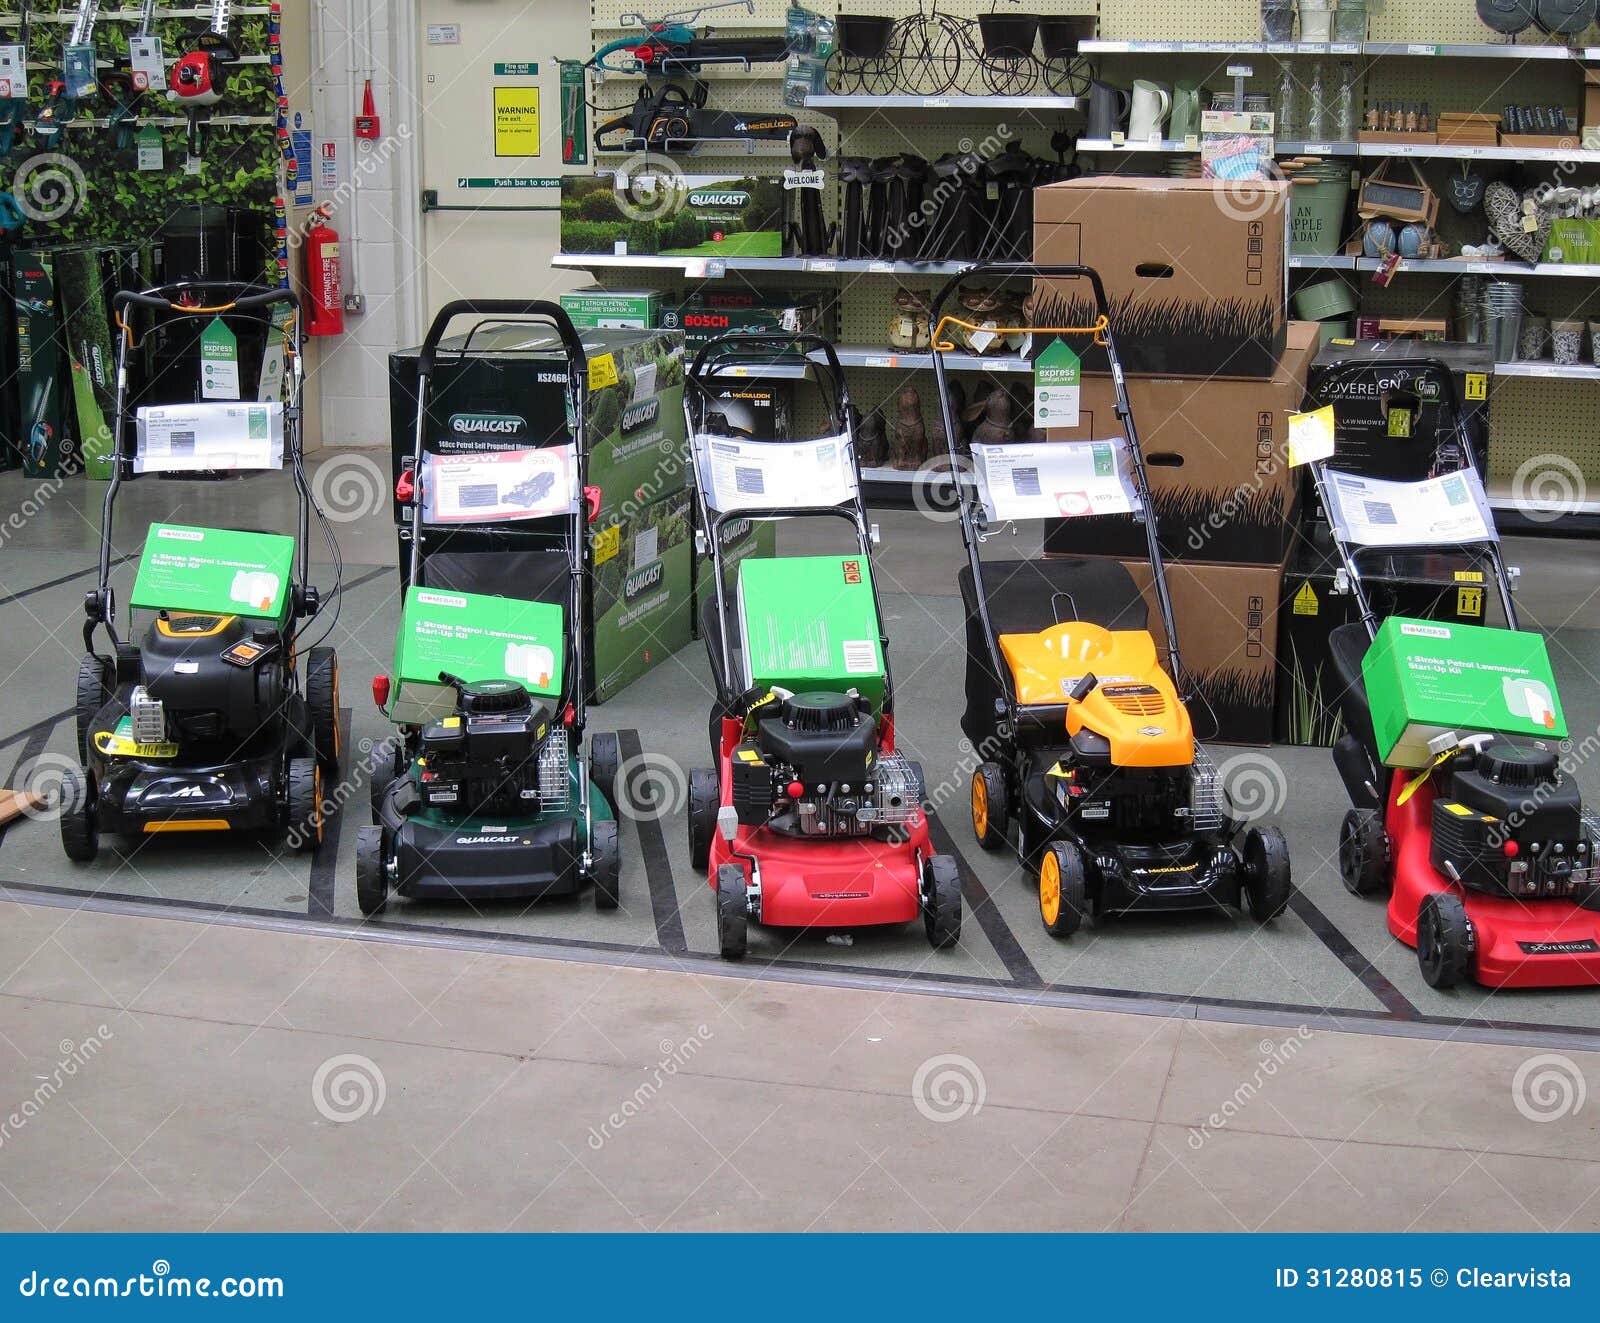 Lawn Mower Display in a Garden Store. Editorial Image - Image of united